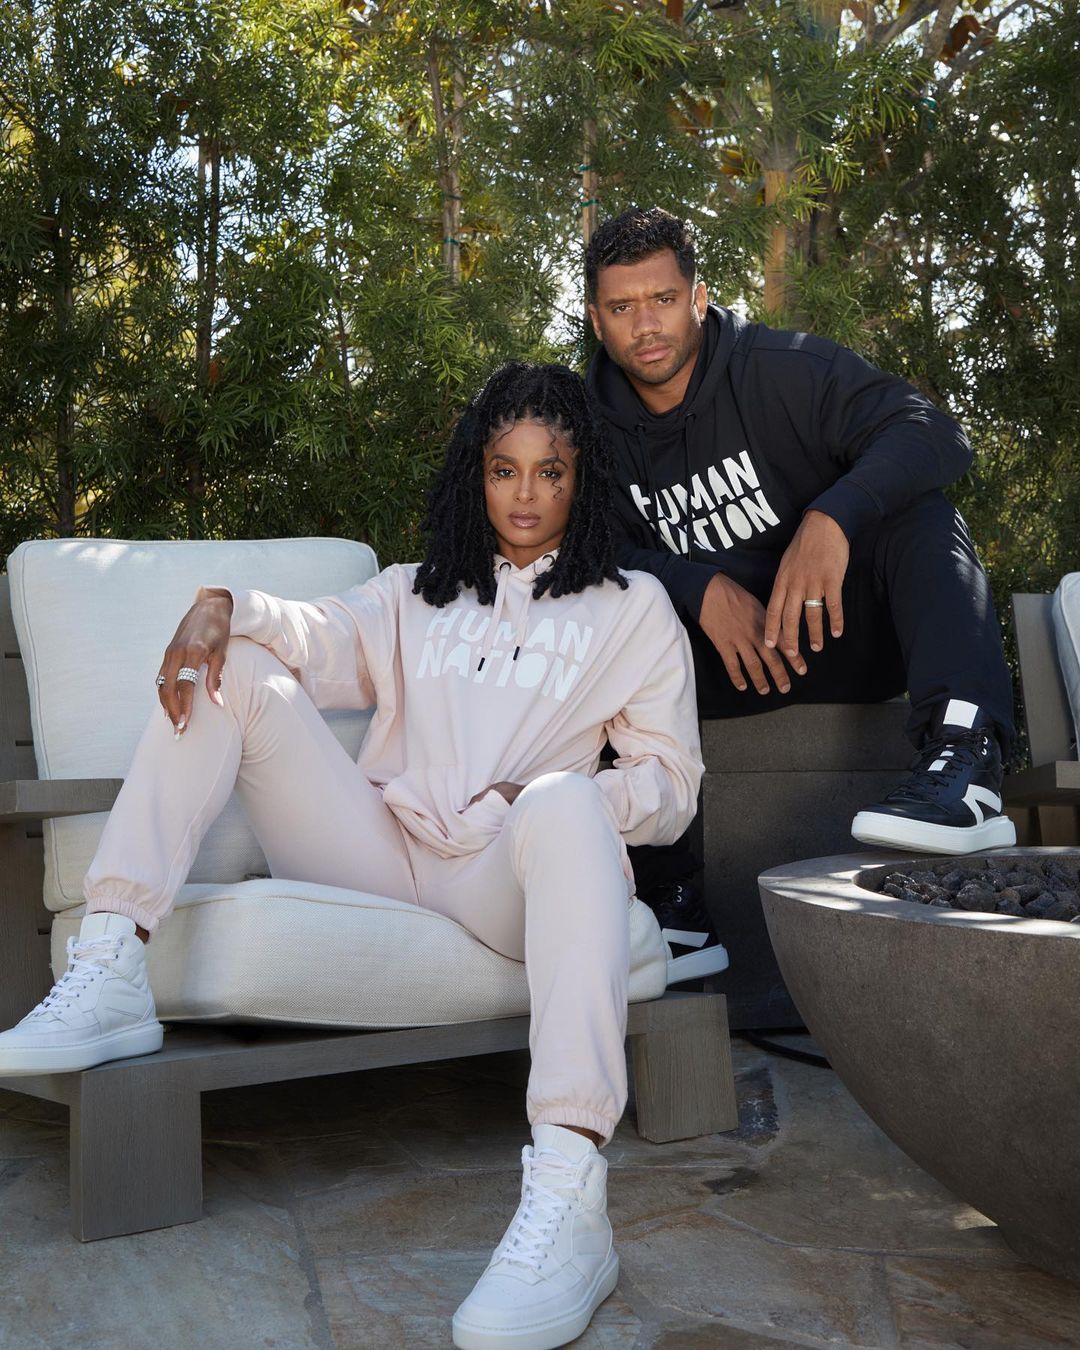 Russell wilson dating ciara in Durban